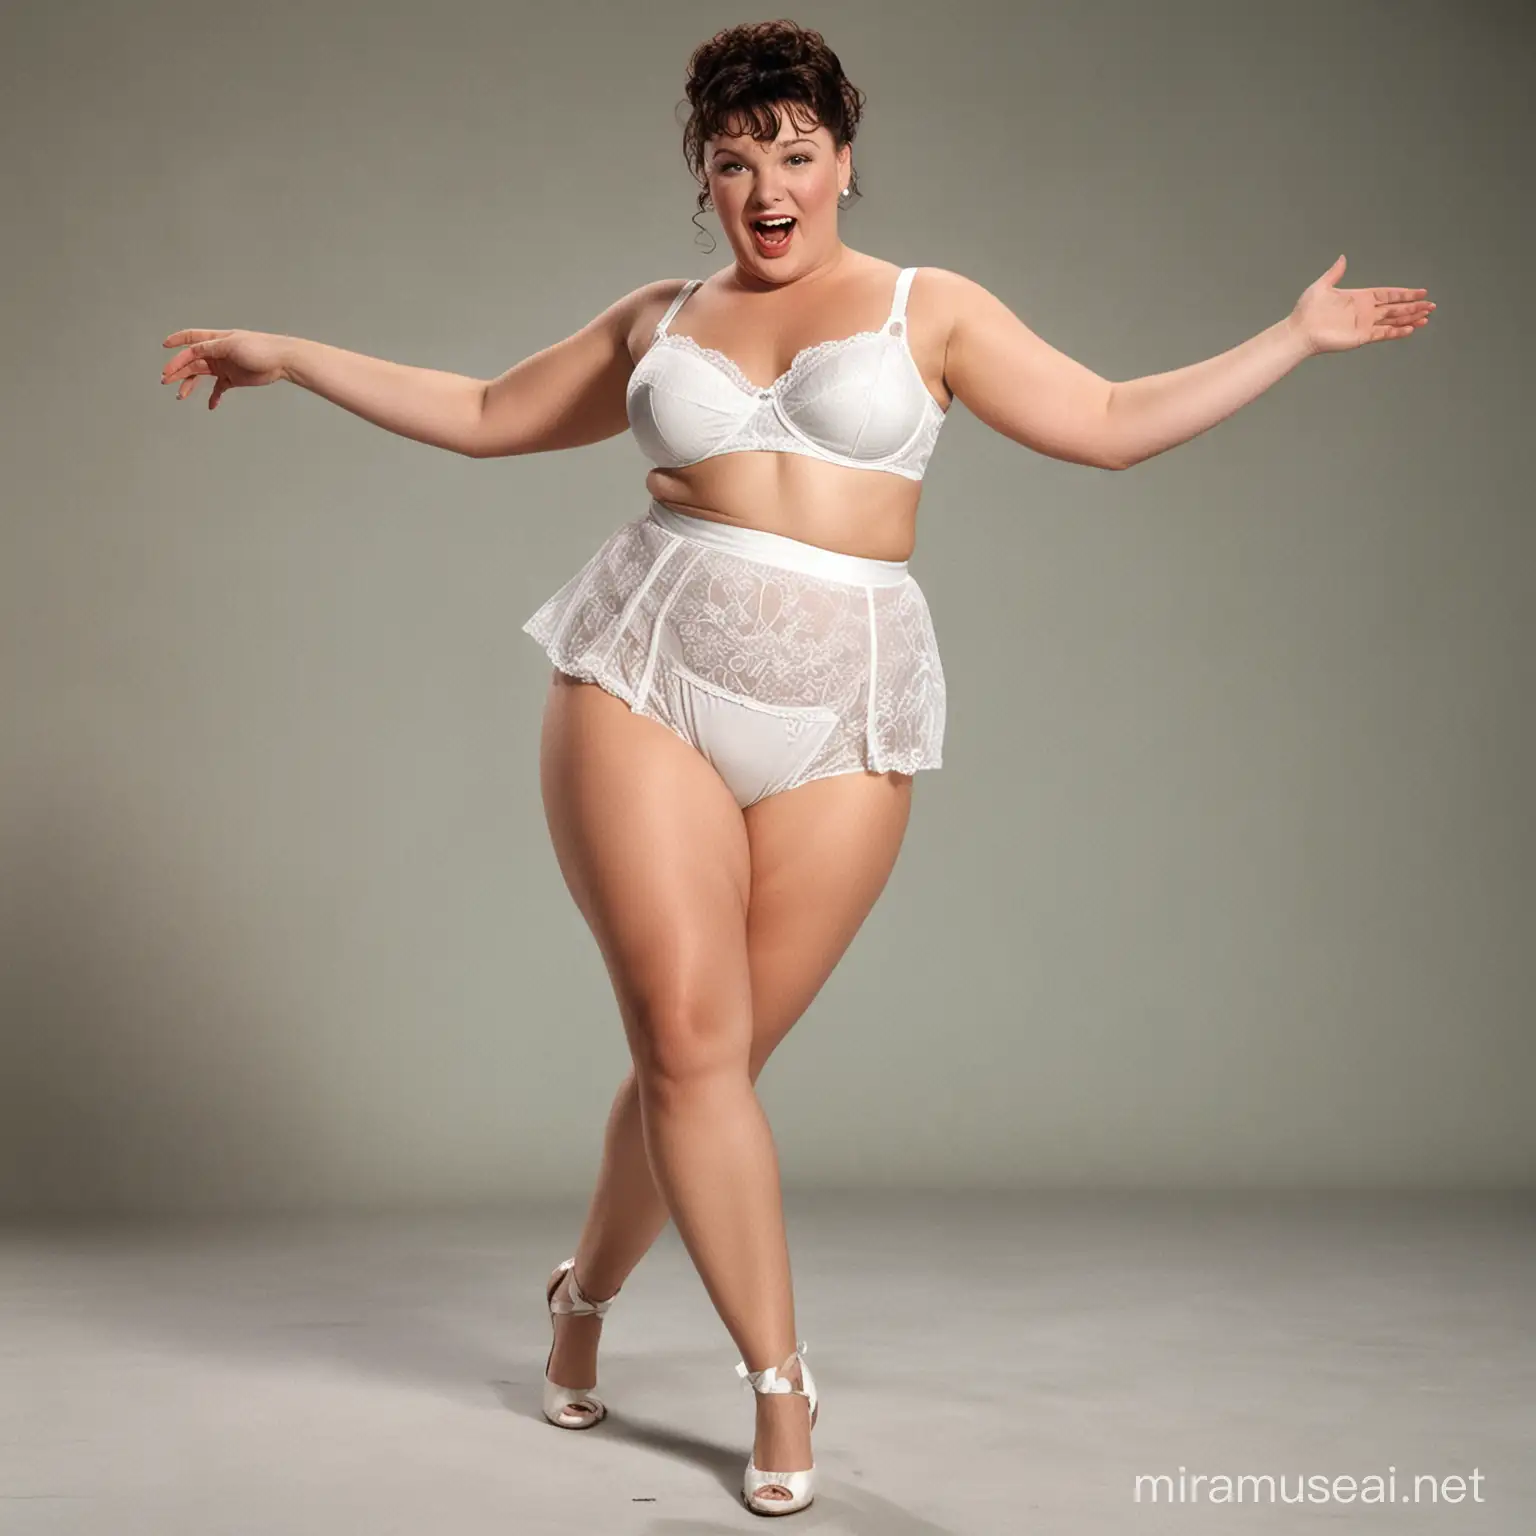 Oliver Hardy Dressed as Woman Dancing in Wet White Panties